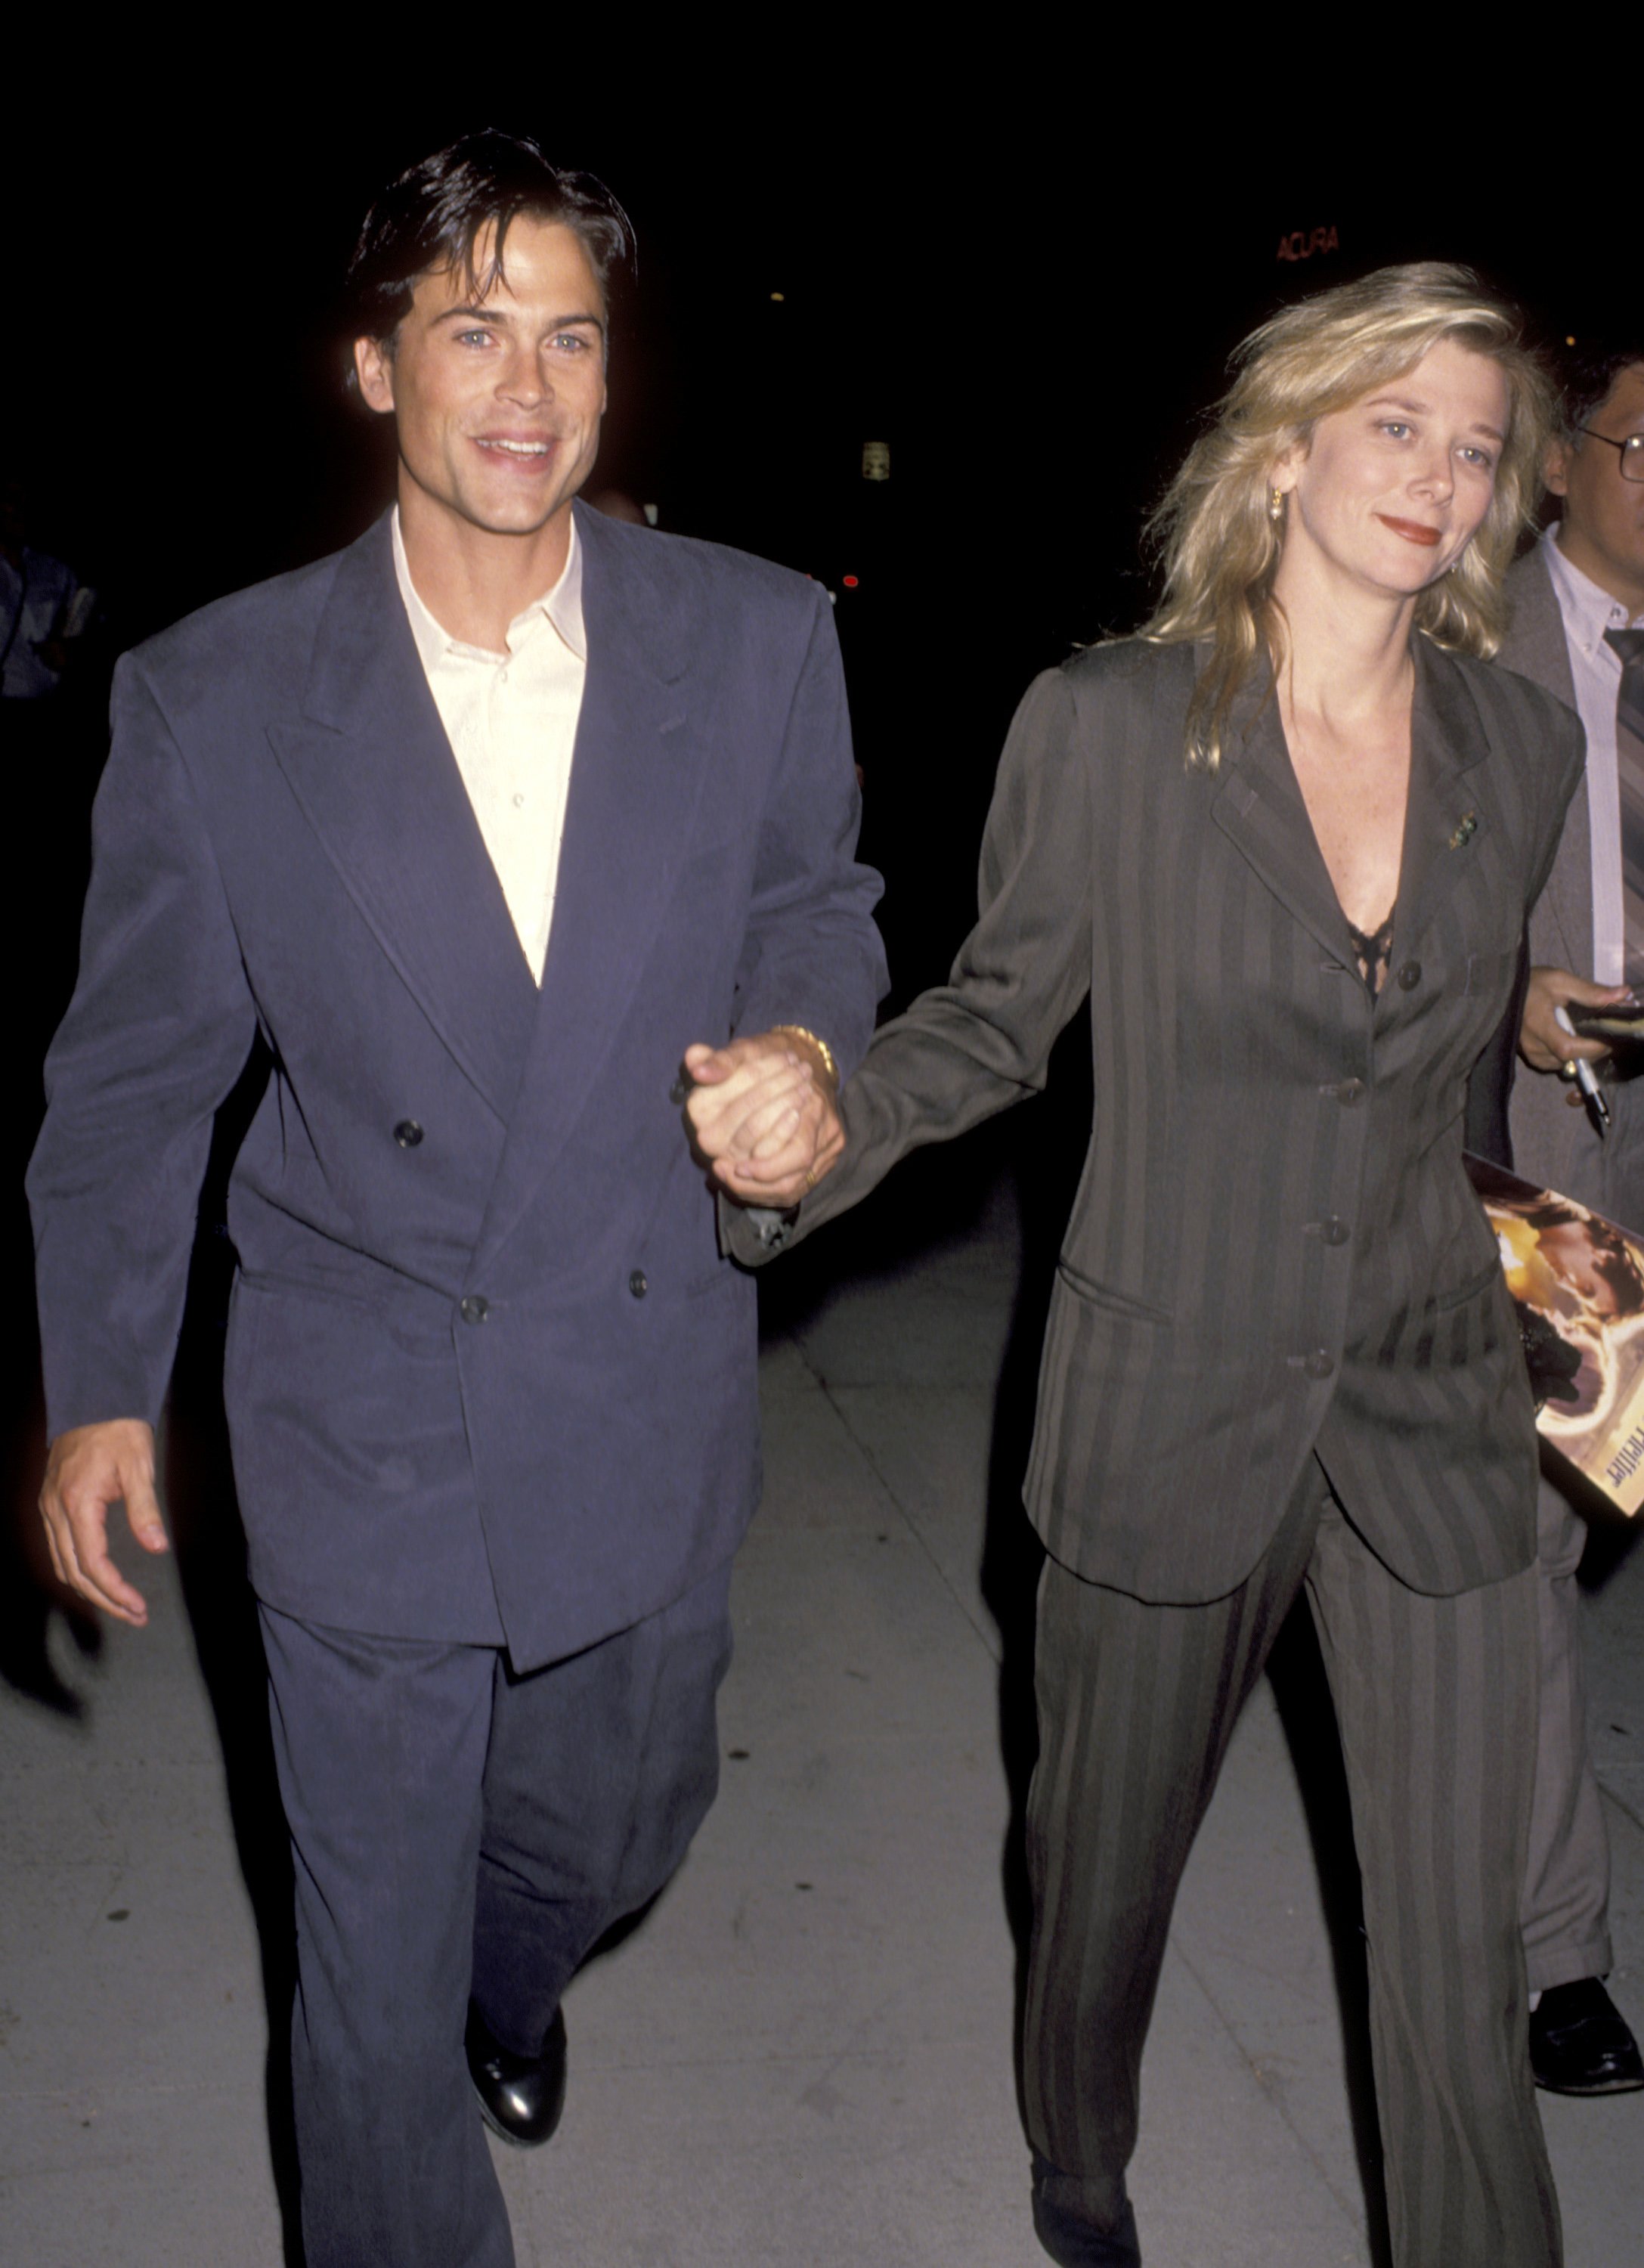 Lowe and Berkoff during “Frankie and Johnny” Los Angeles Premiere in 1991. | Source: Getty Images